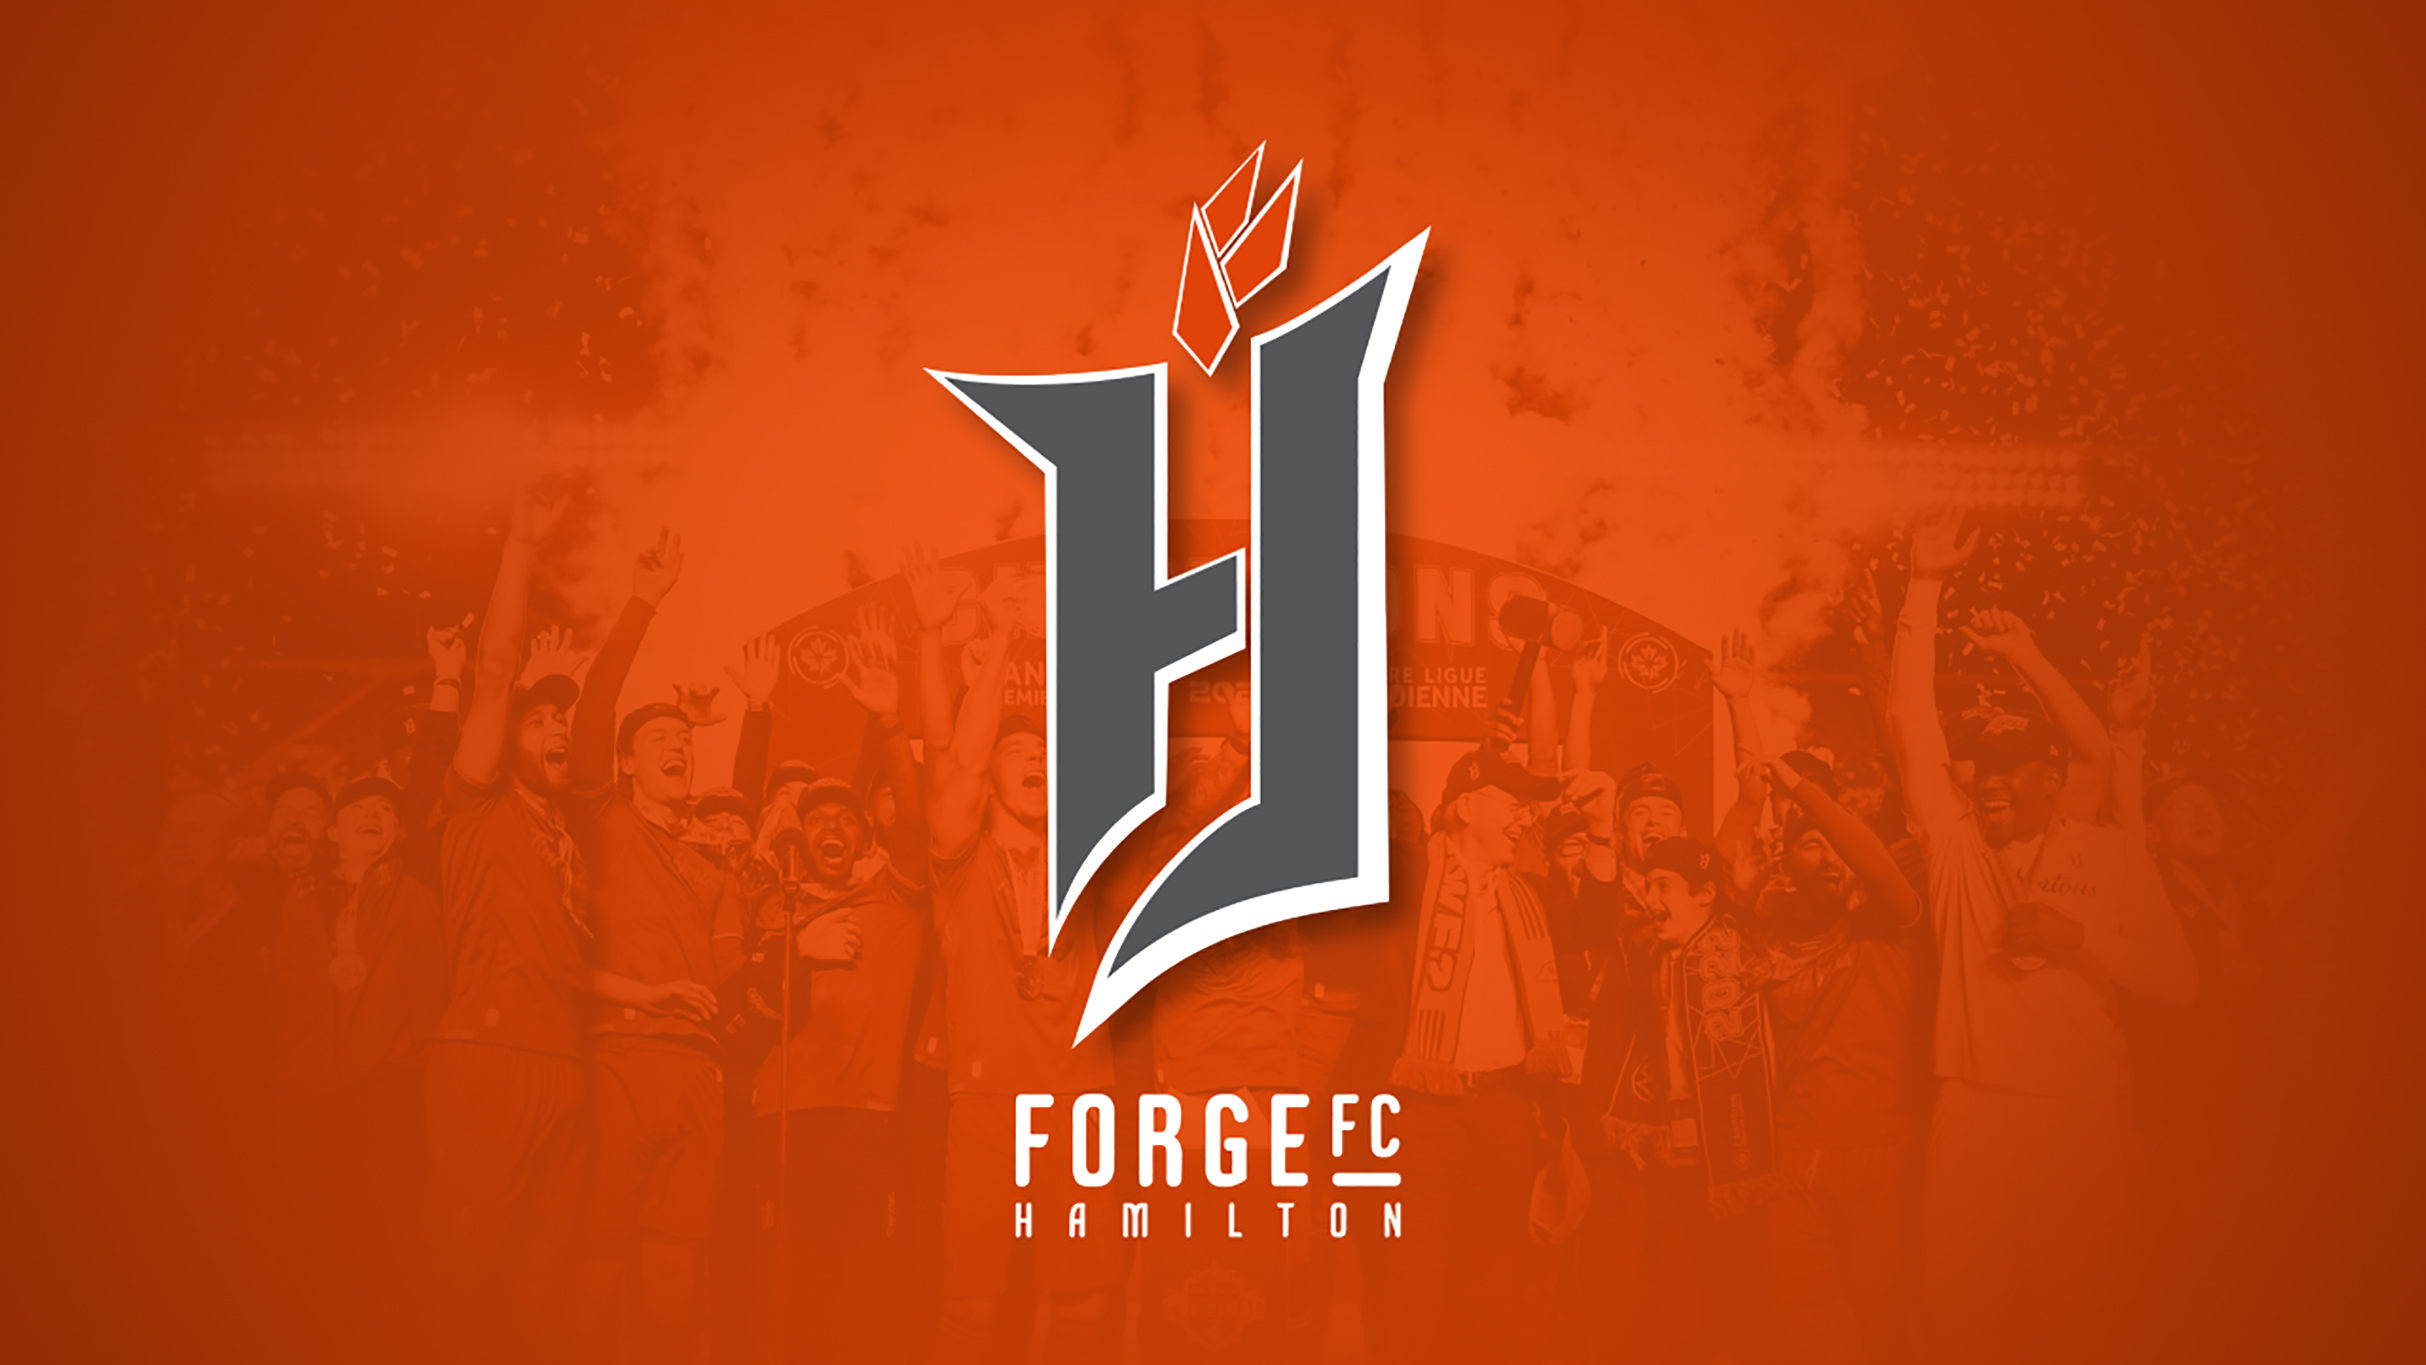 Forge FC vs. Vancouver FC